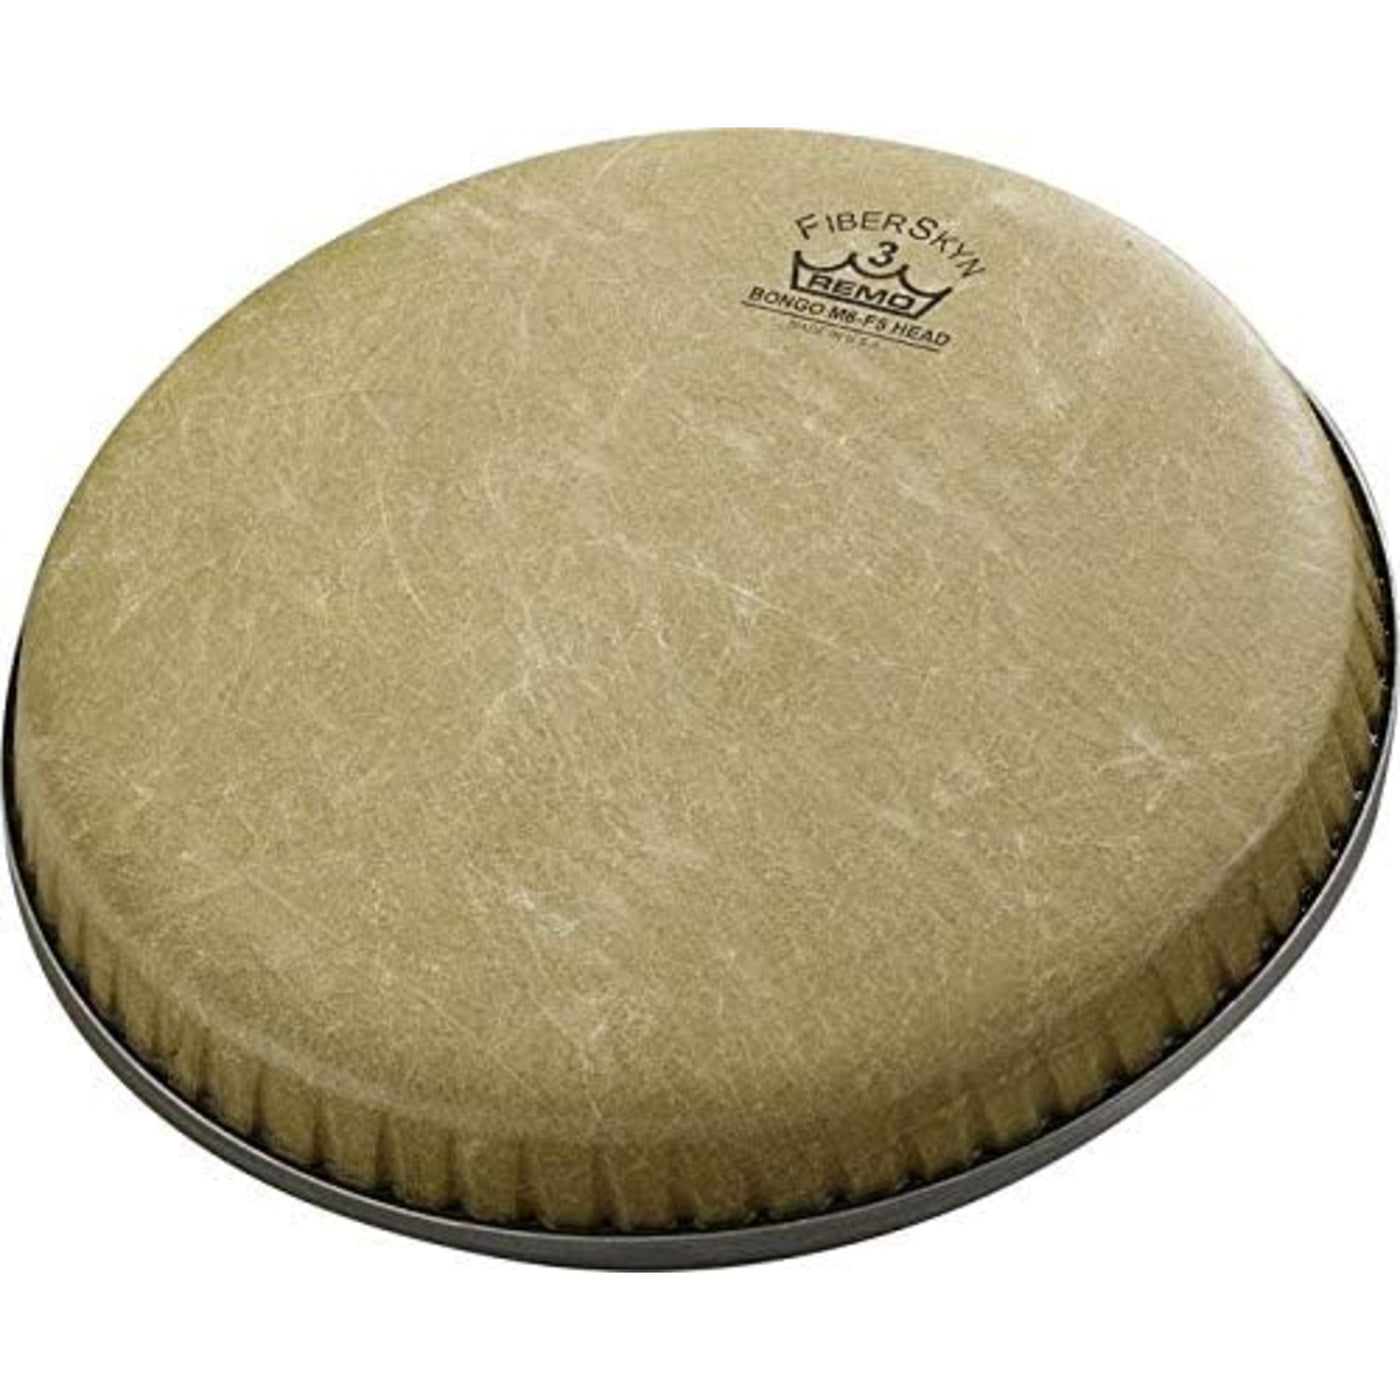 Remo M5-1250-FD R Series Drum Head for Djembe - 12.5"